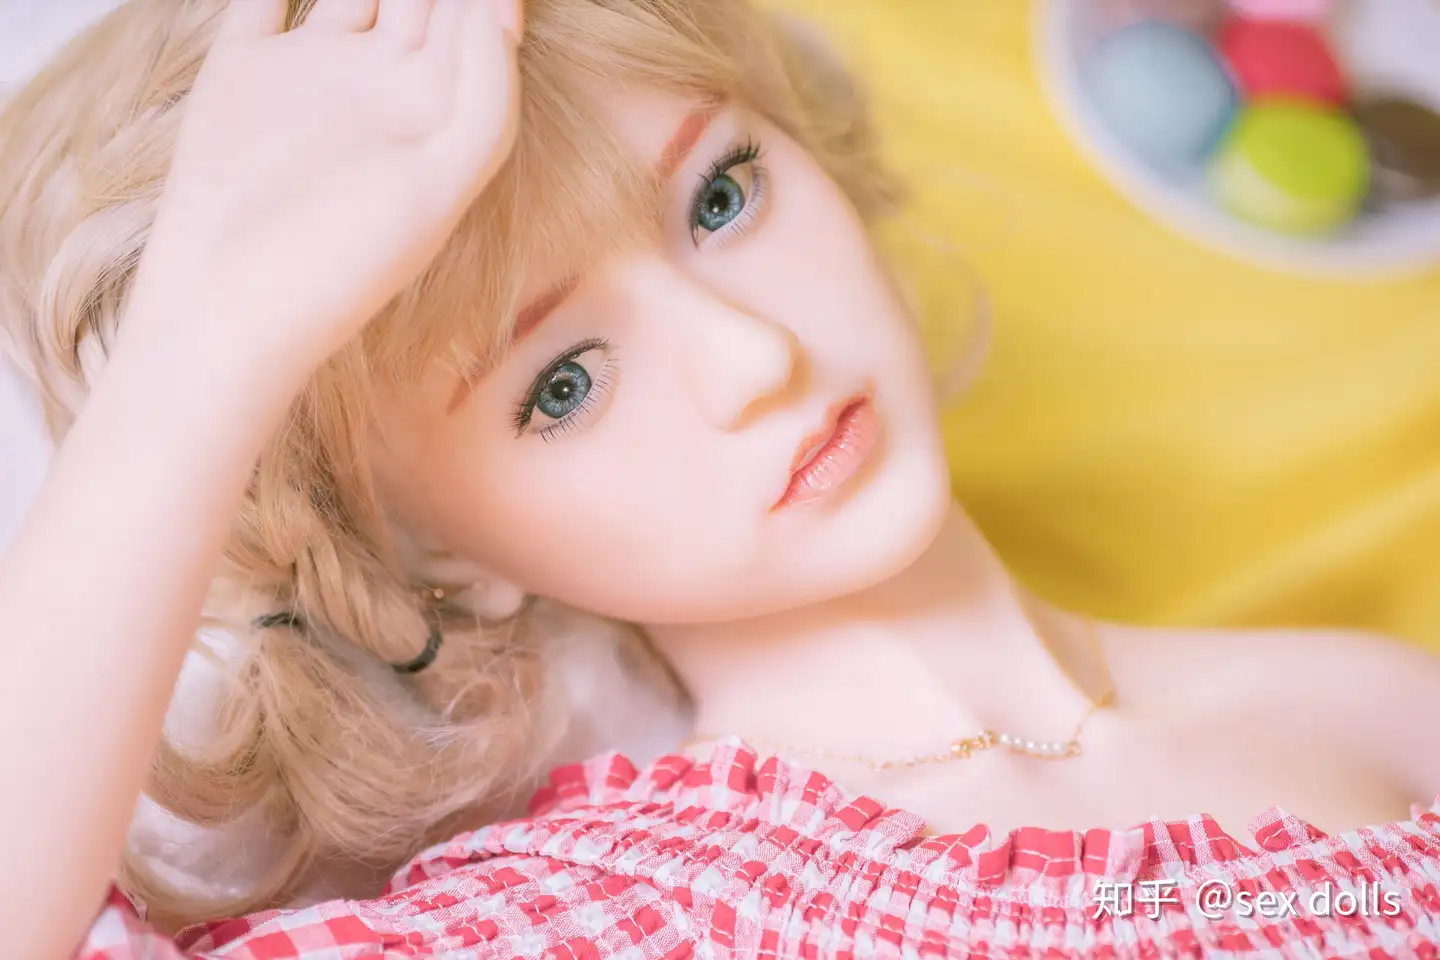 Table 2: Article - Best Sex Dolls: Exploring a Growing Trend in Intimacy